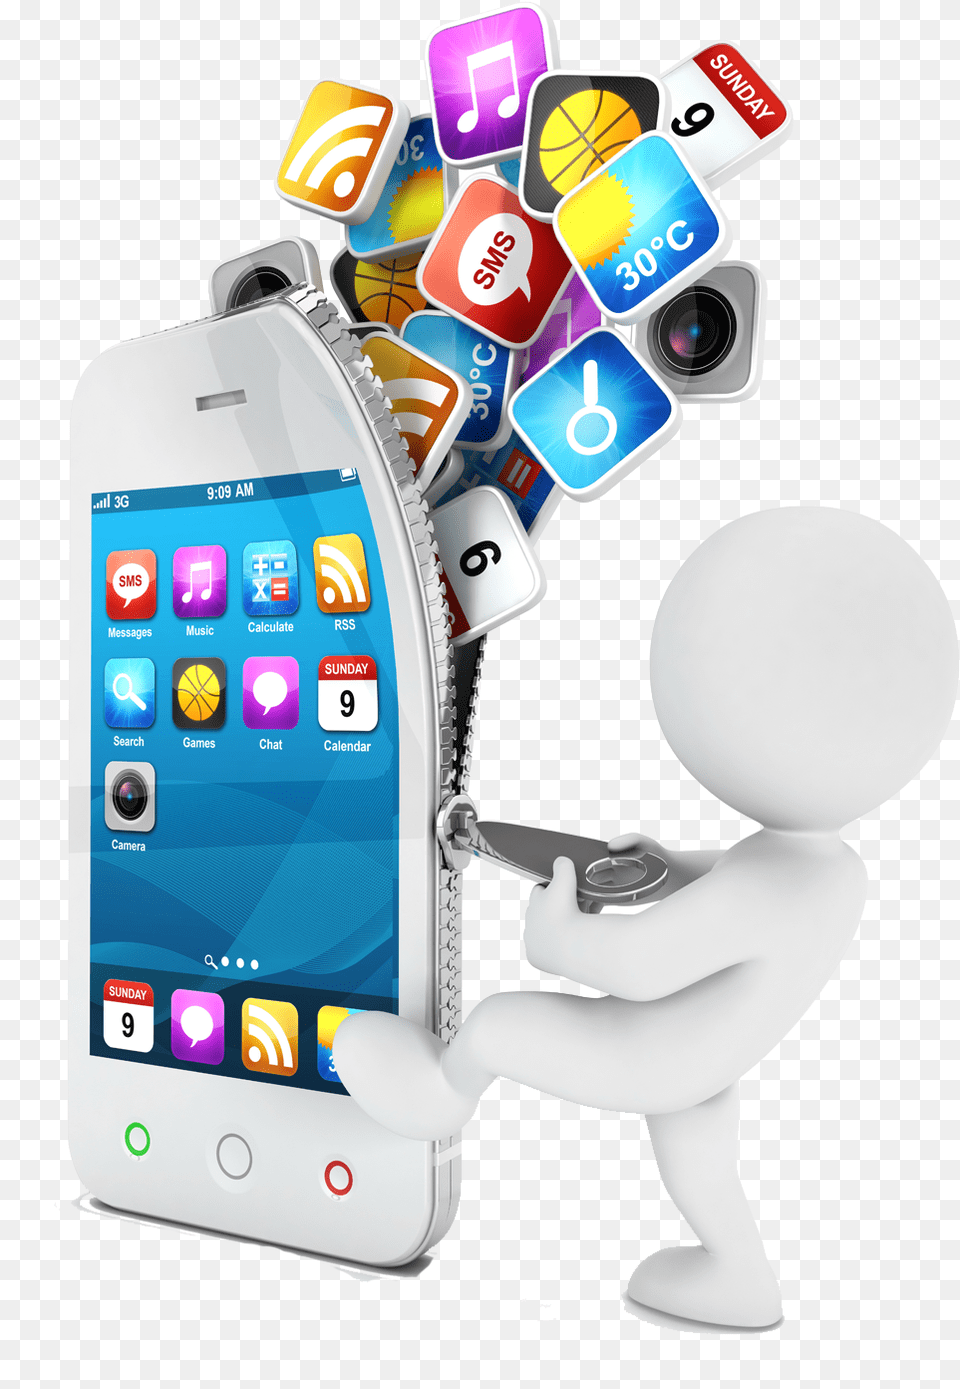 Mobile Apps Vietnam Mobile Telecom Services, Electronics, Mobile Phone, Phone, Baby Free Png